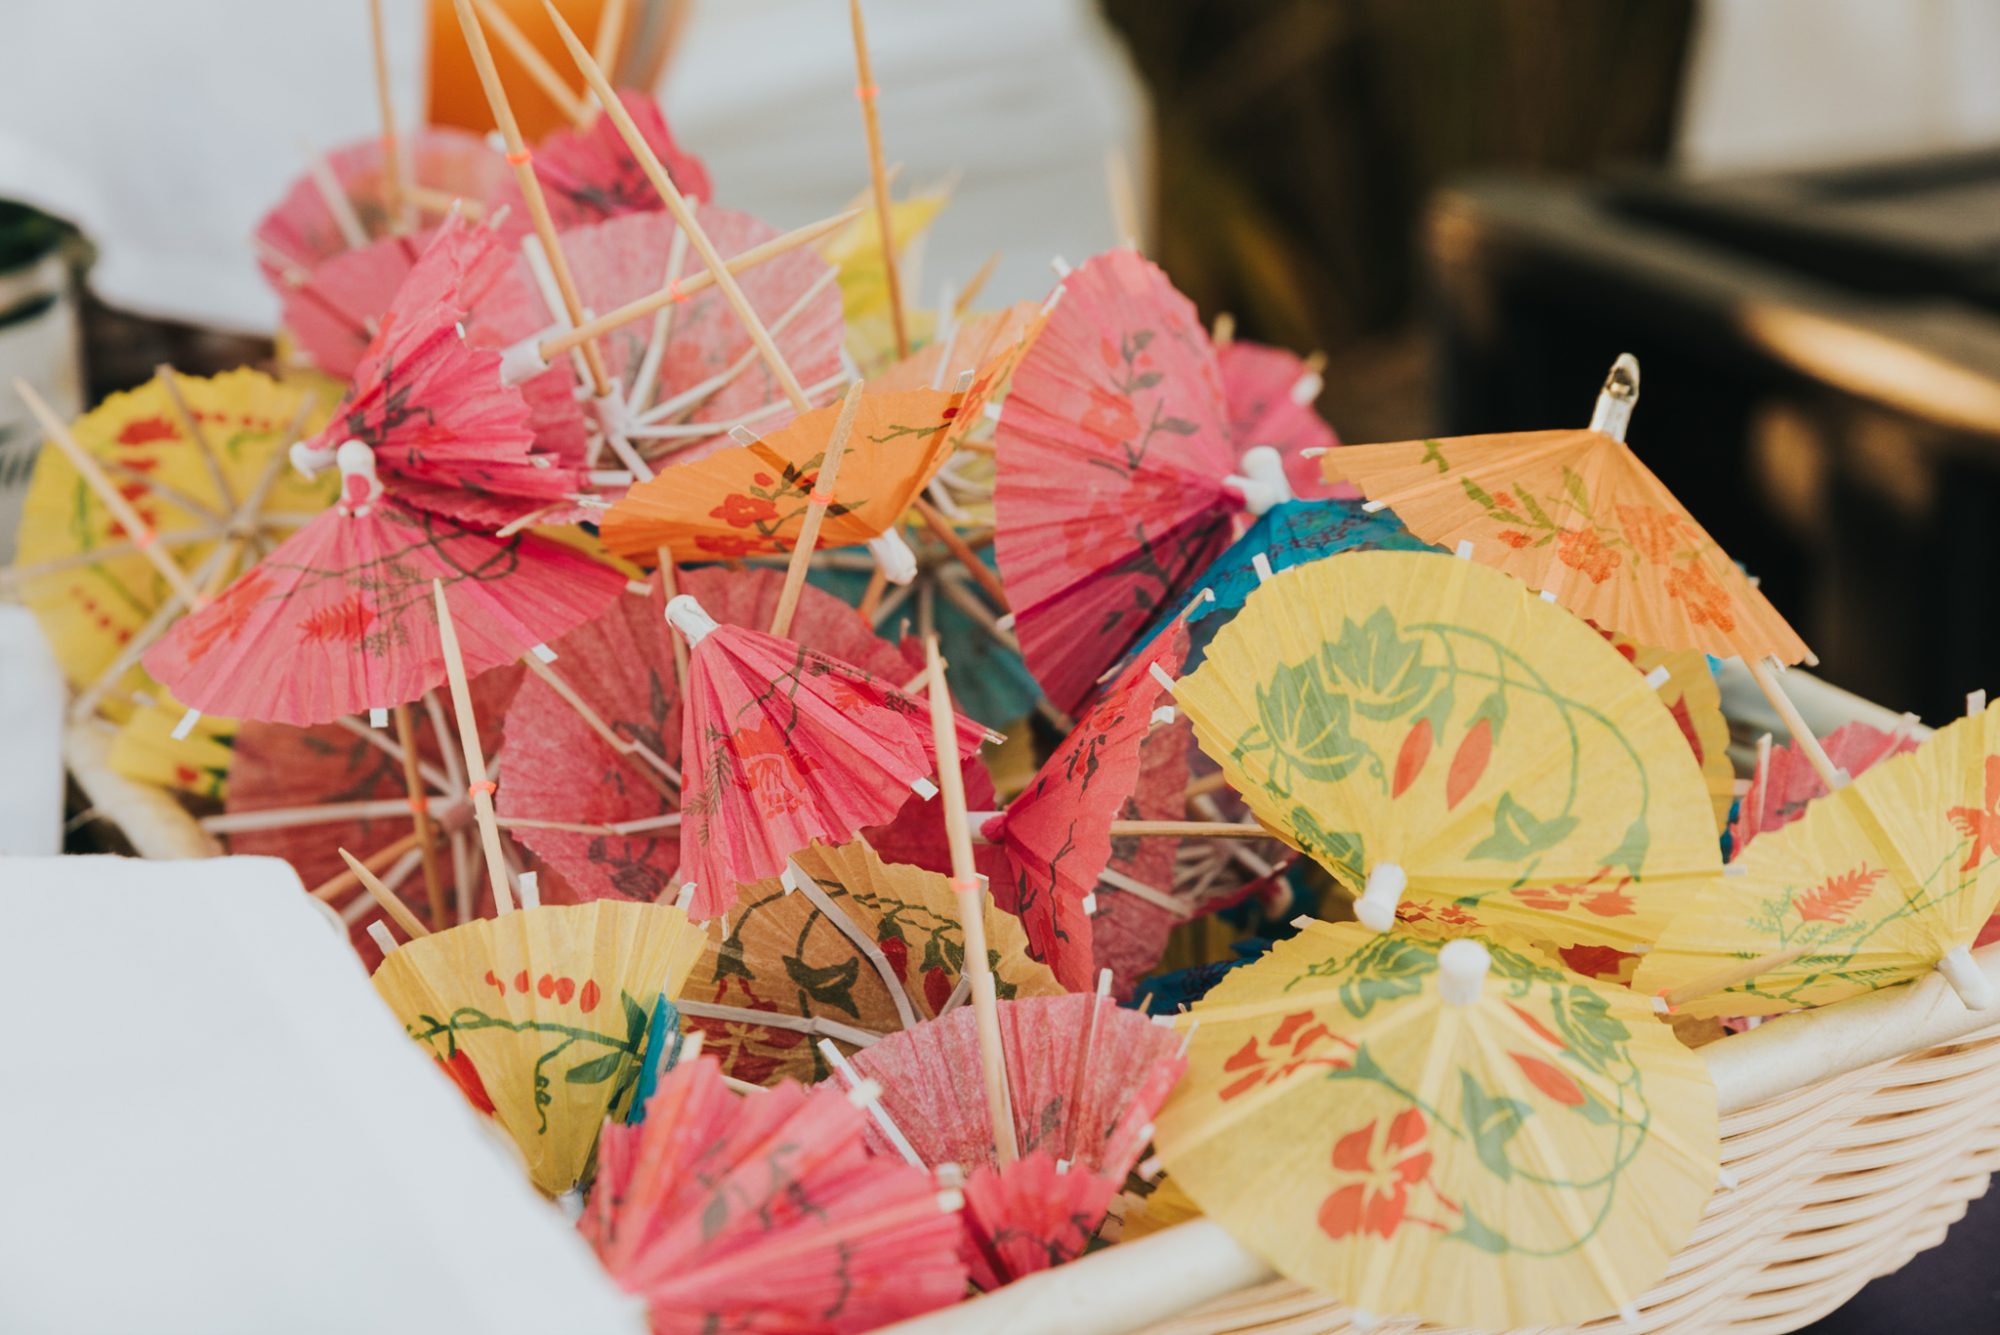 A wicker basket filled with colorful paper umbrellas for an Islamorada wedding at the Postcard Inn at Holiday Isle.